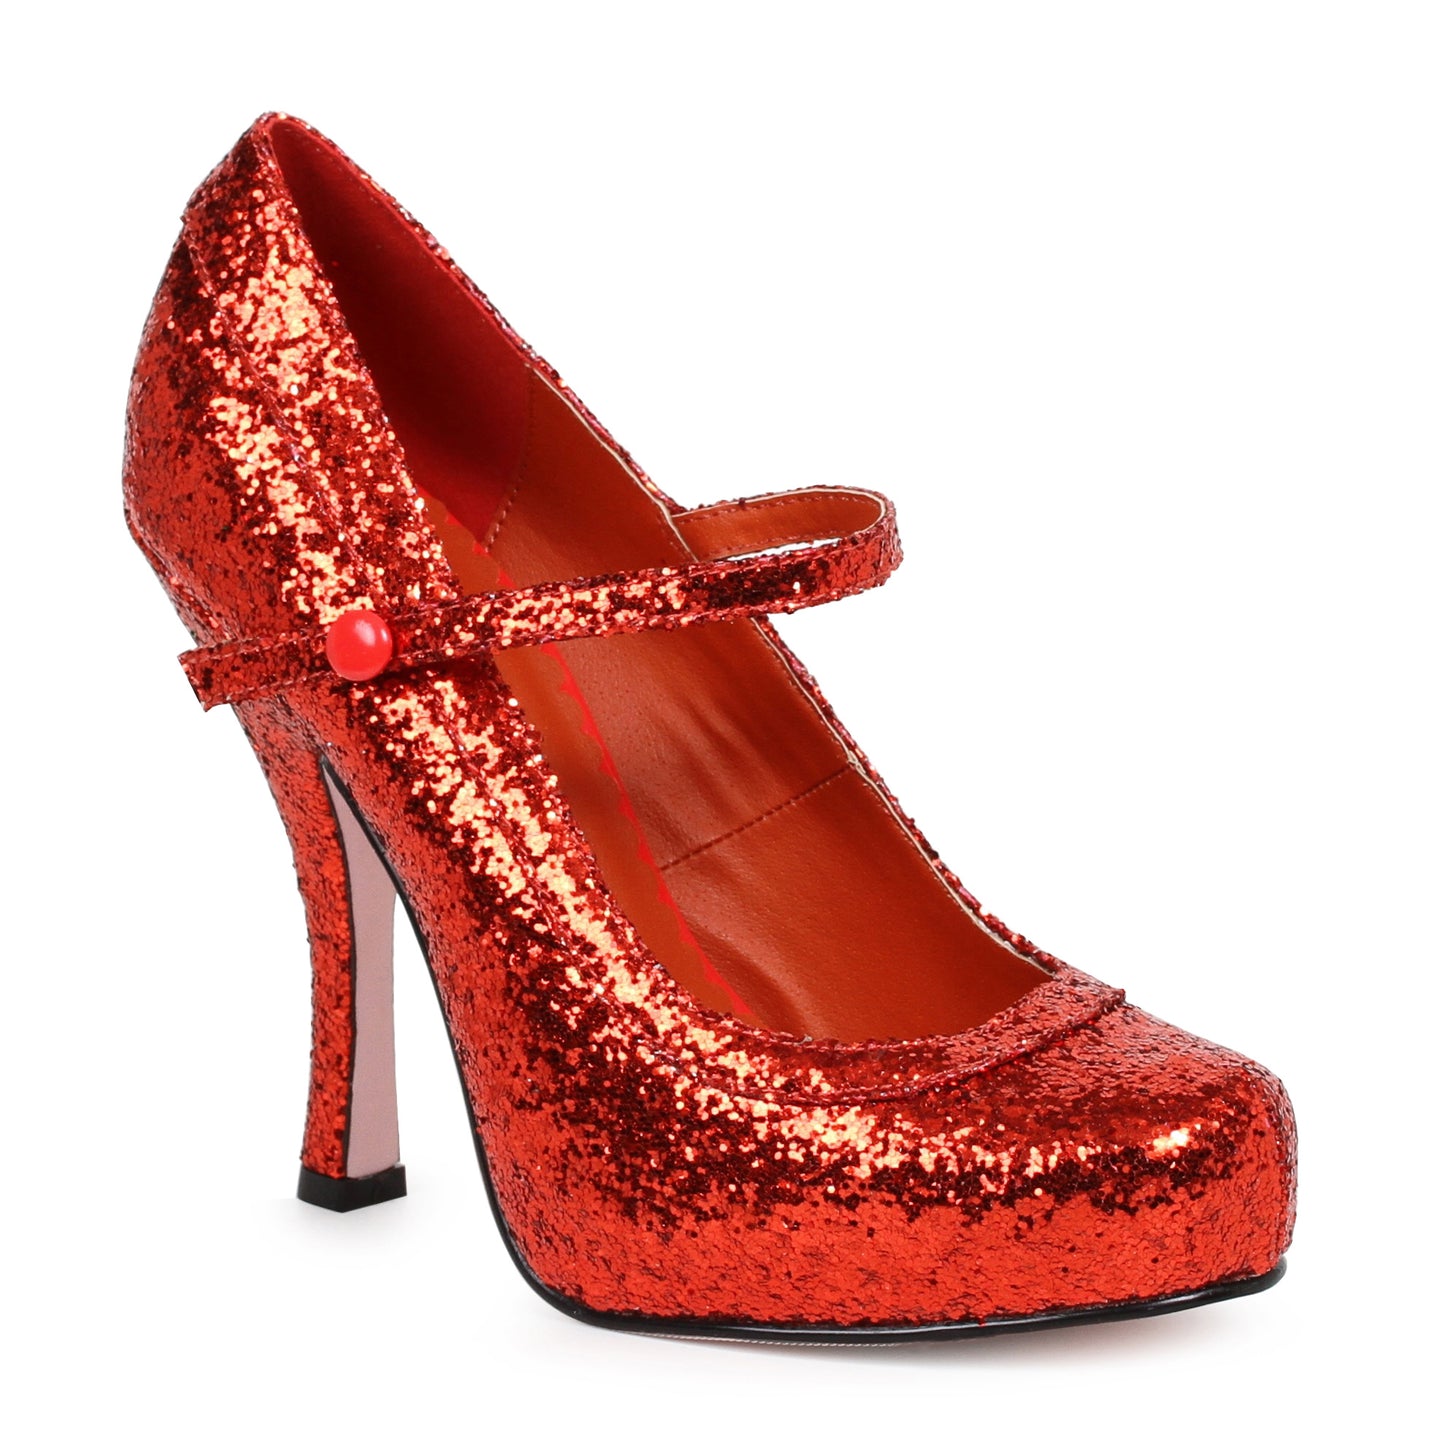 423-CANDY Ellie Shoes 4" Glitter Mary Jane With 1Concealed Platform. 